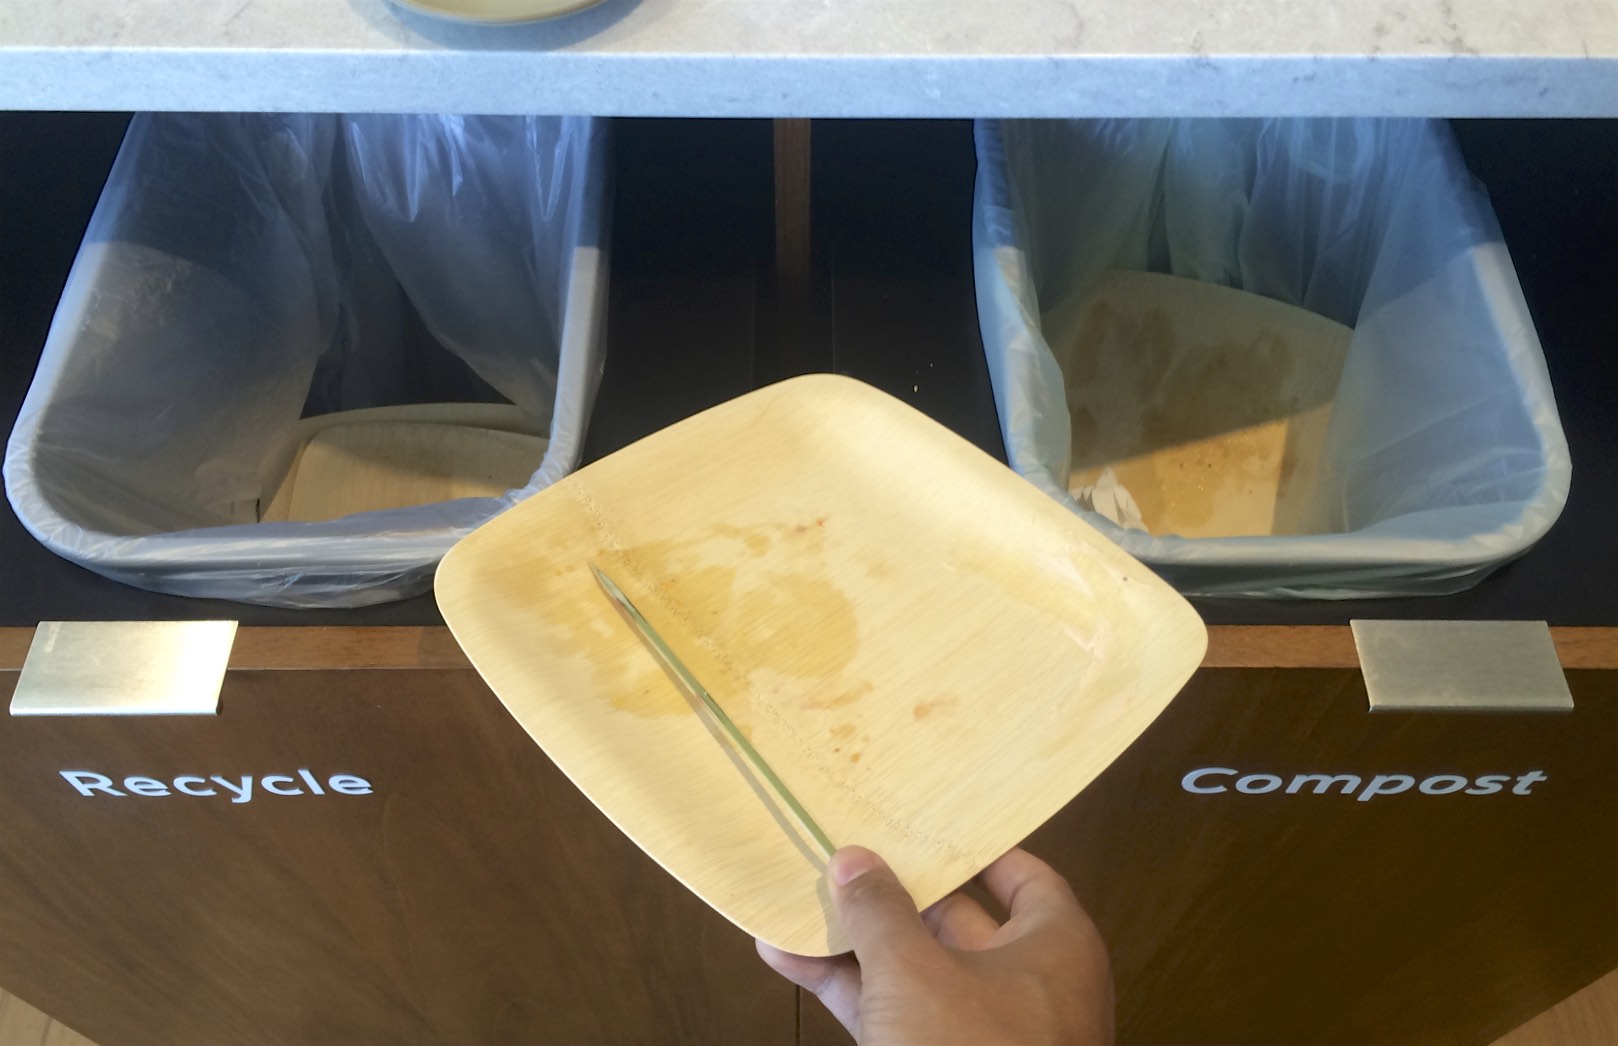 Recycling mistakes by employees at a corporate HQ